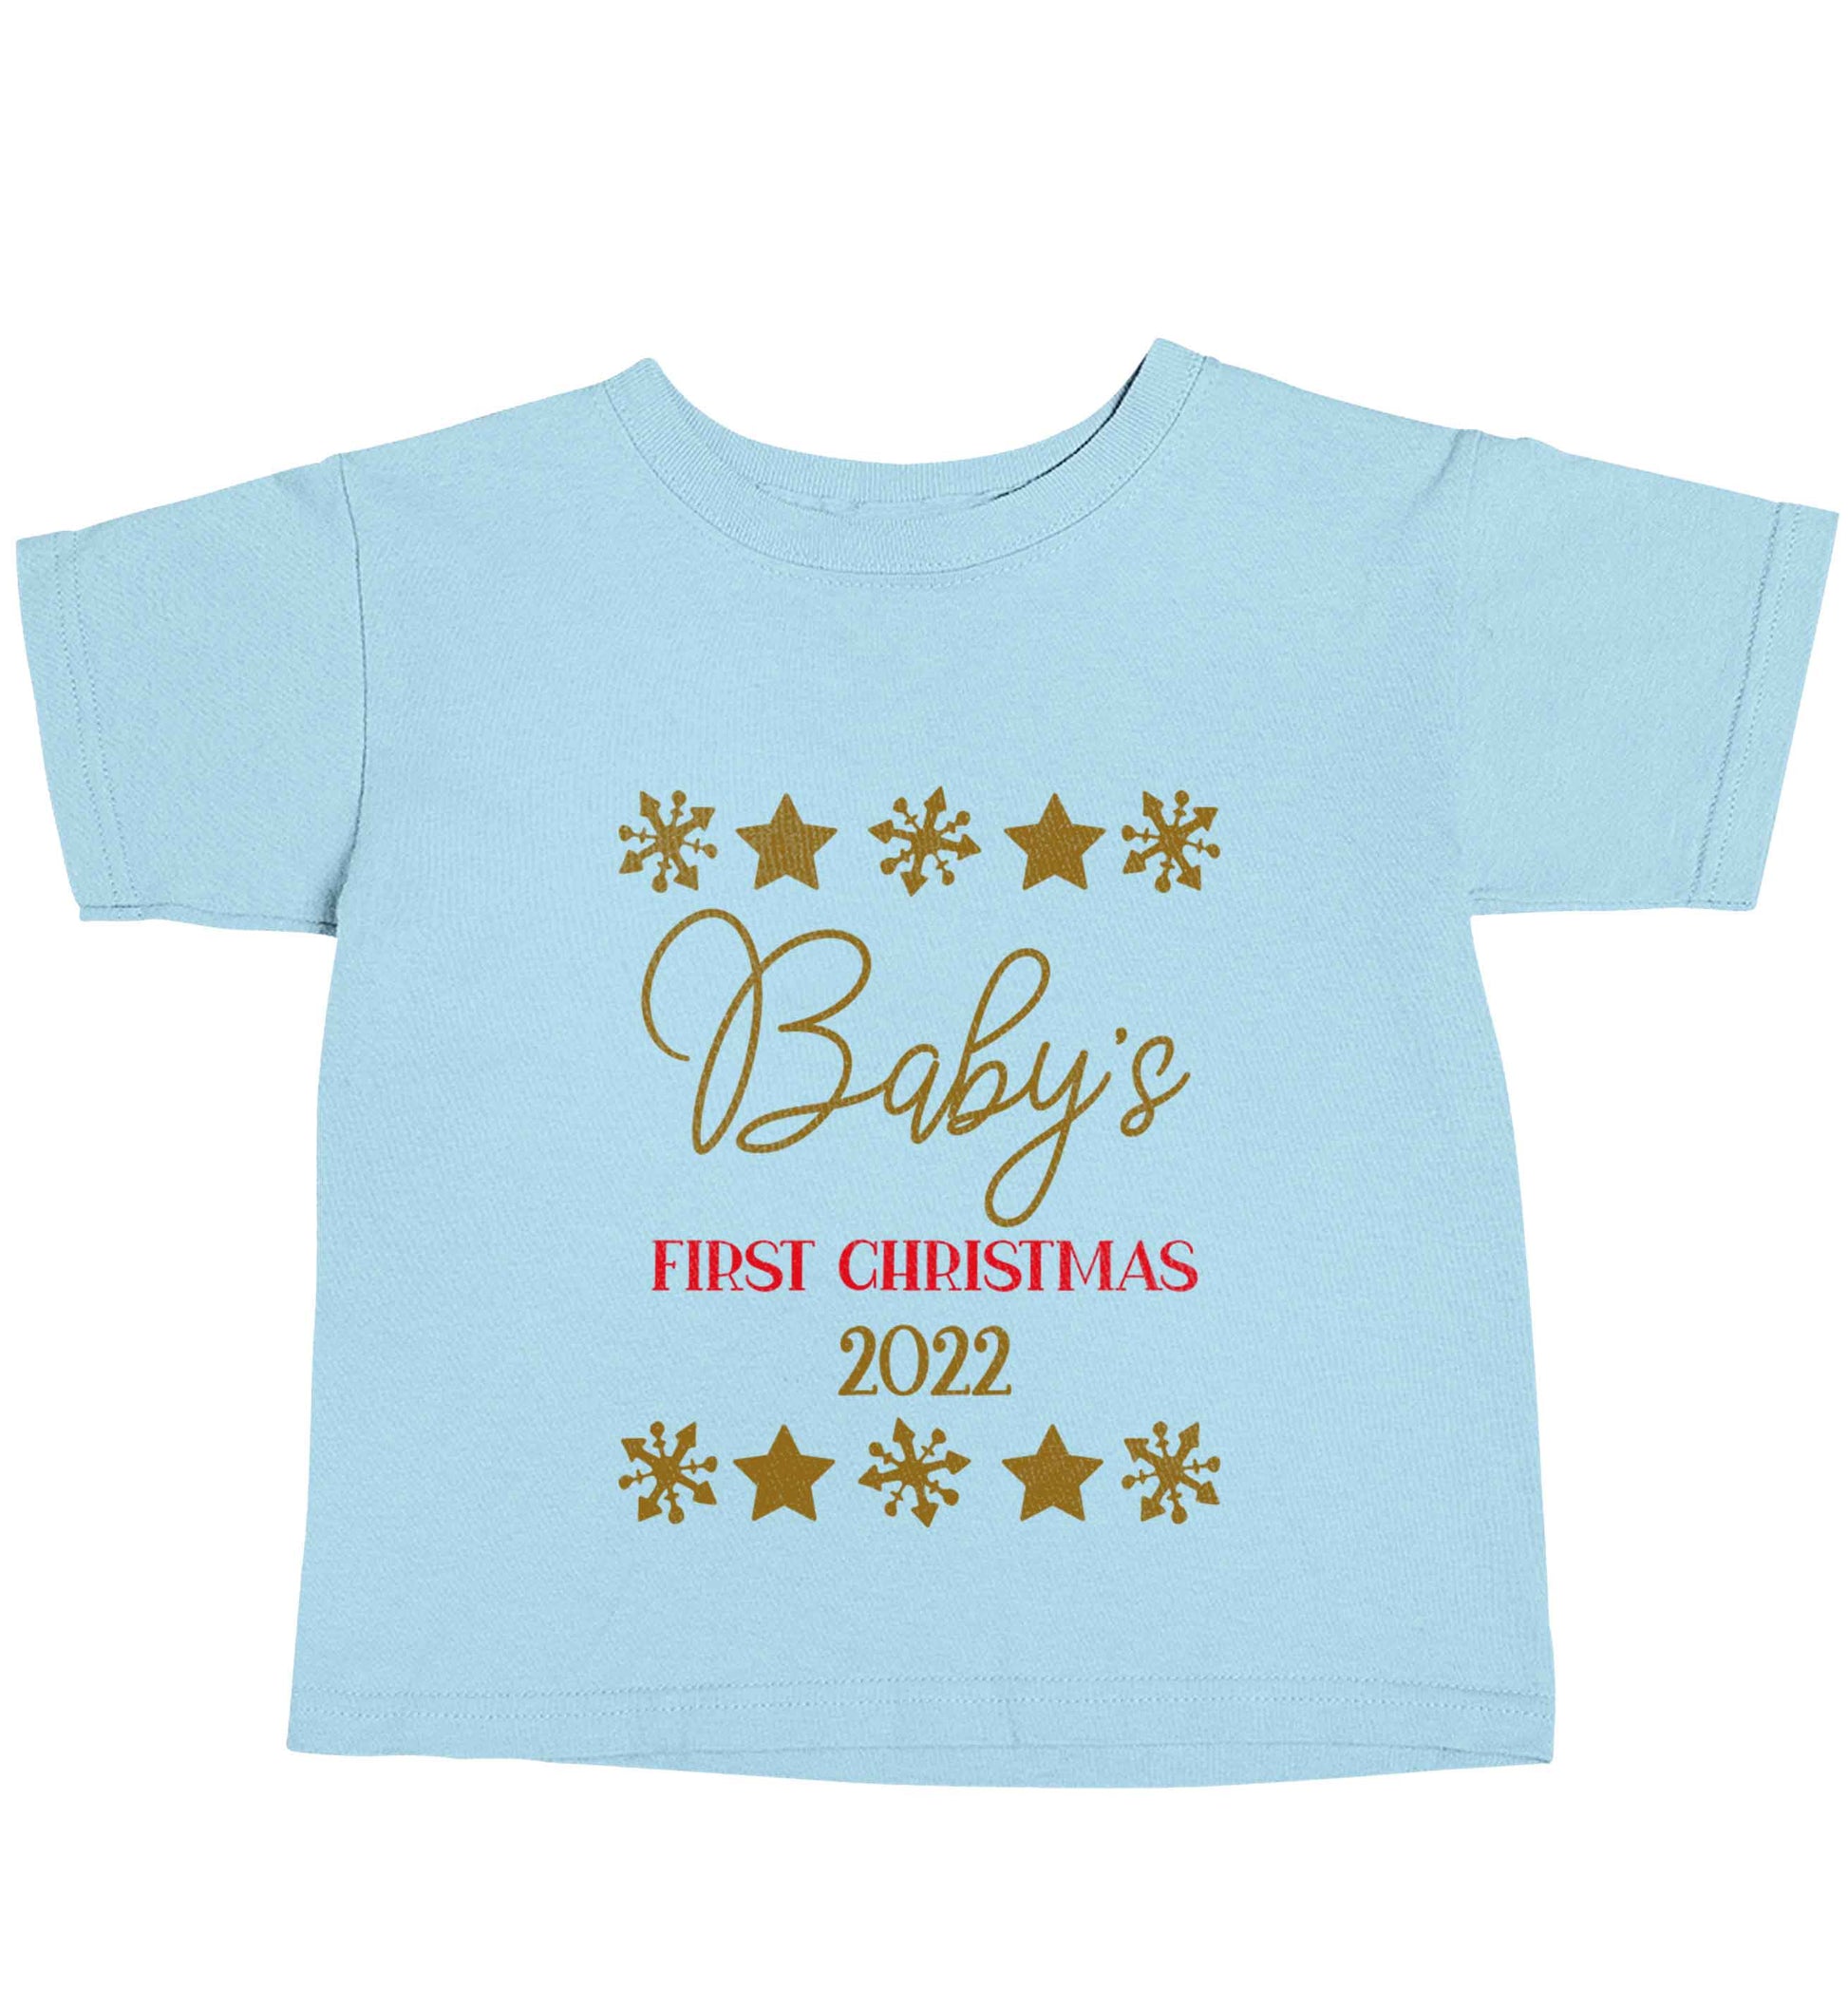 Baby's first Christmas light blue baby toddler Tshirt 2 Years